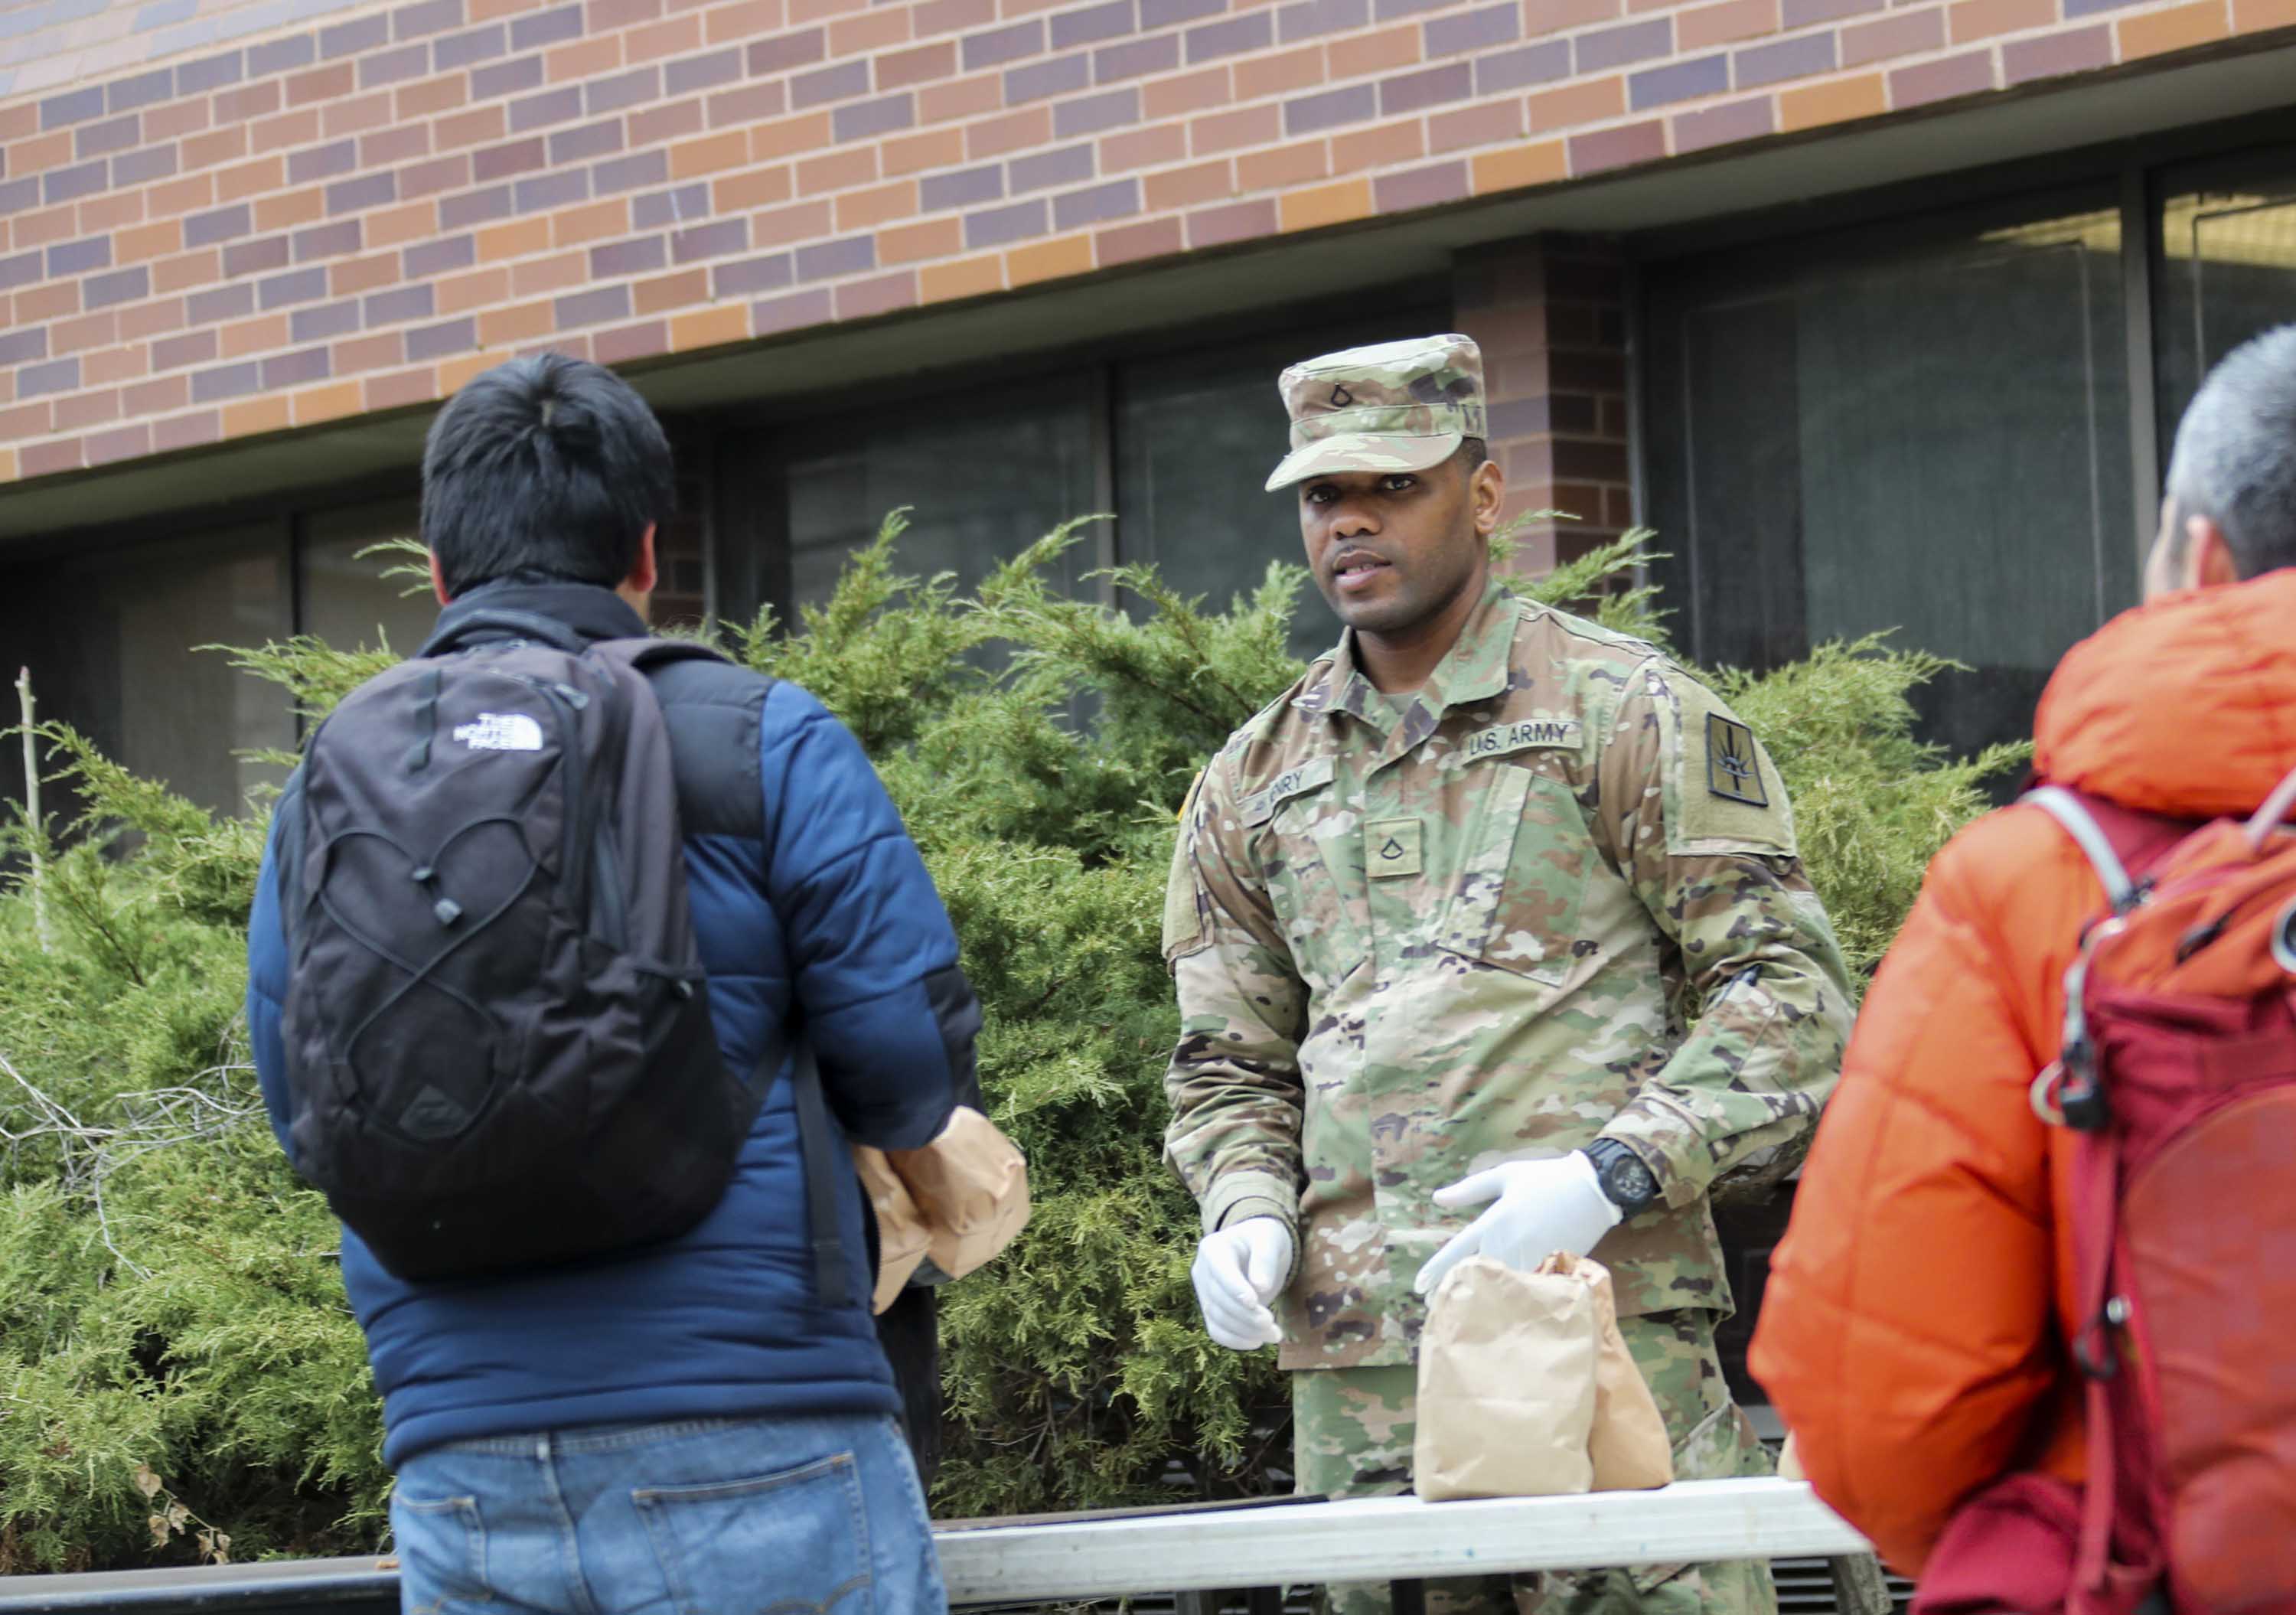 A member of the National Guard distributes food to residents near the containment zone in New Rochelle, New York, on March 12.